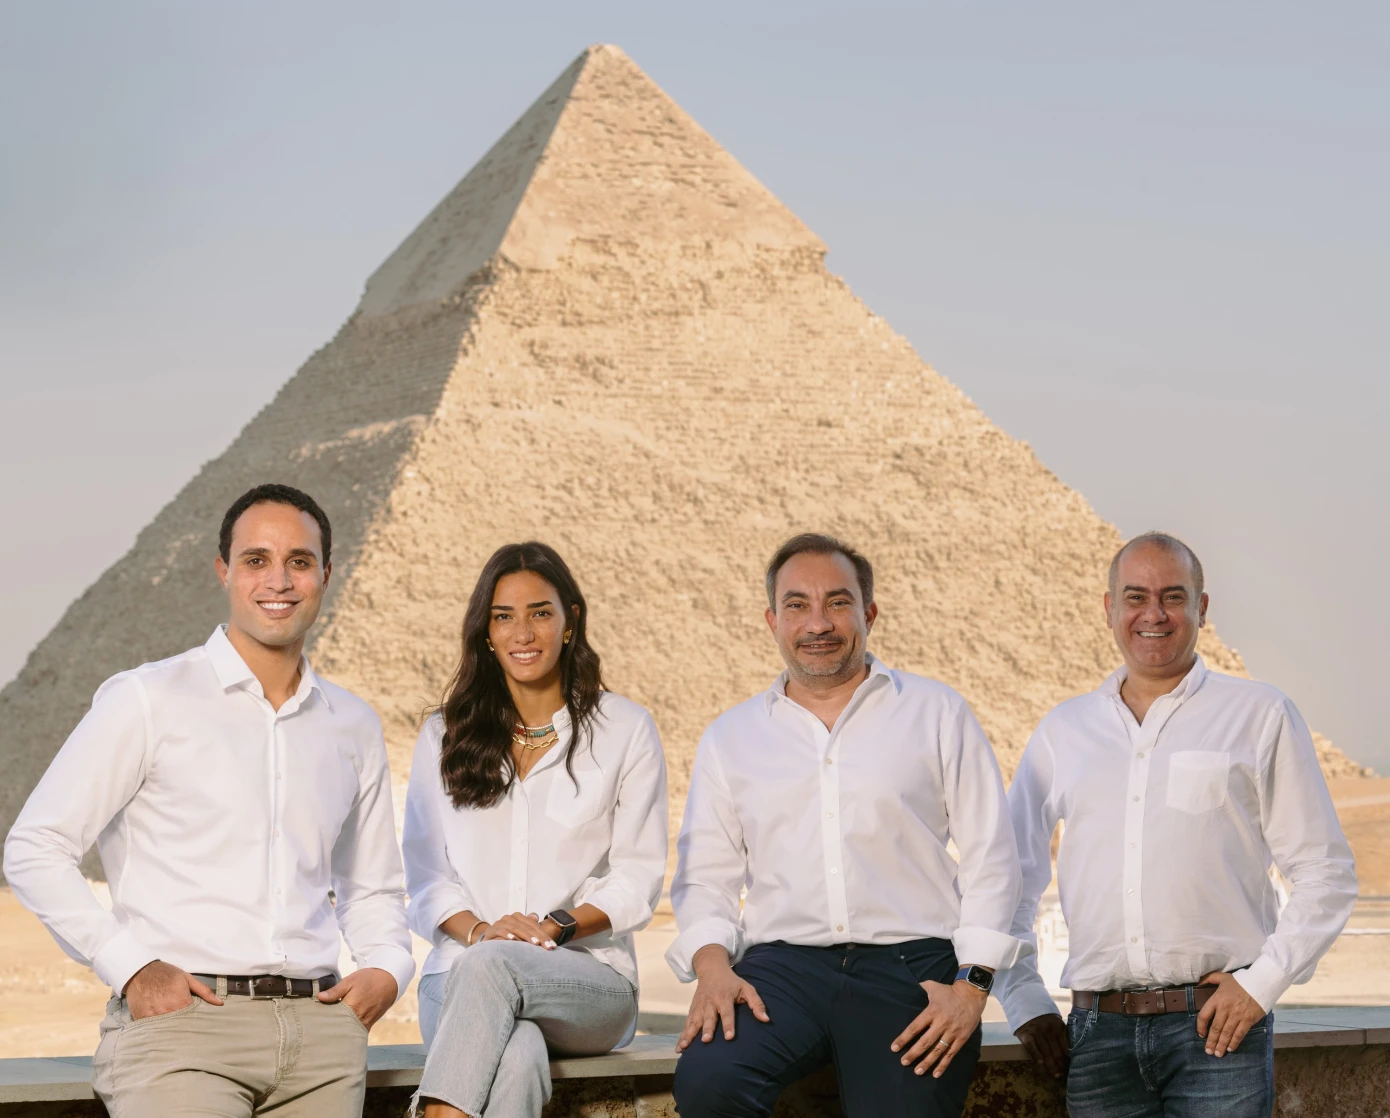 Algebra Ventures, Egyptian Venture Capital Firm Announces its First Close of Second Fund at $100M